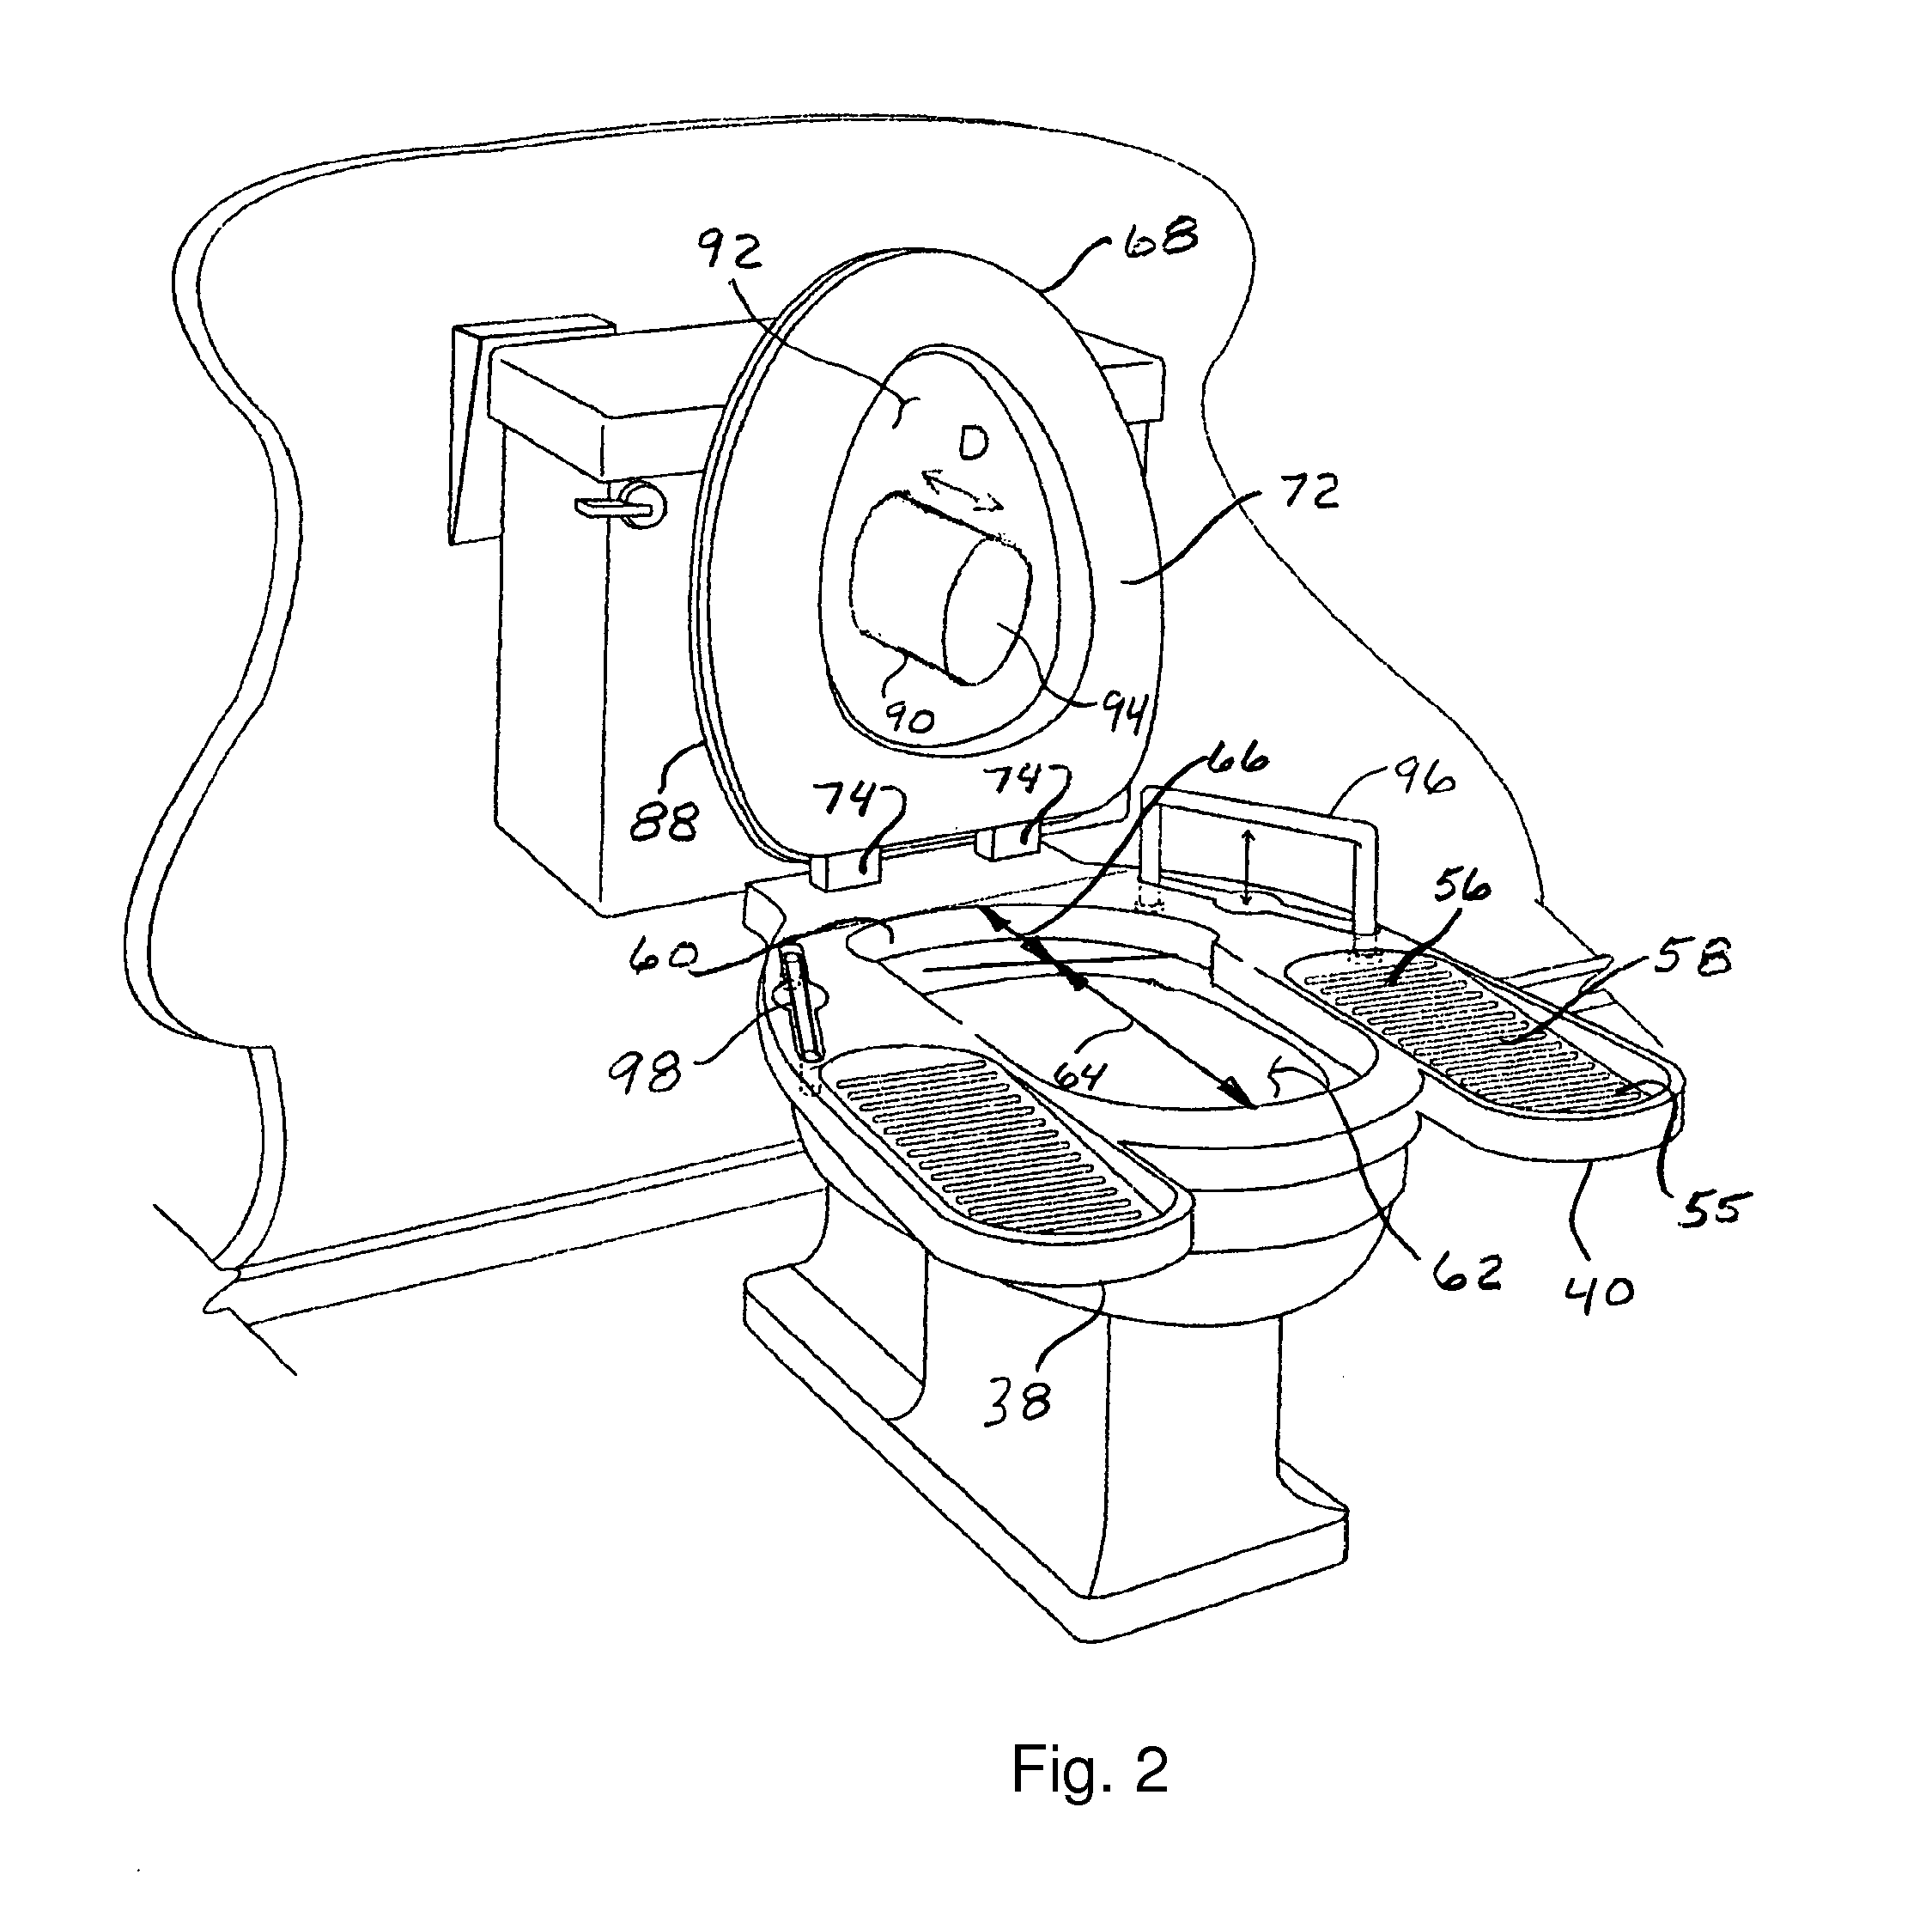 Method and apparatus for defecation and urination